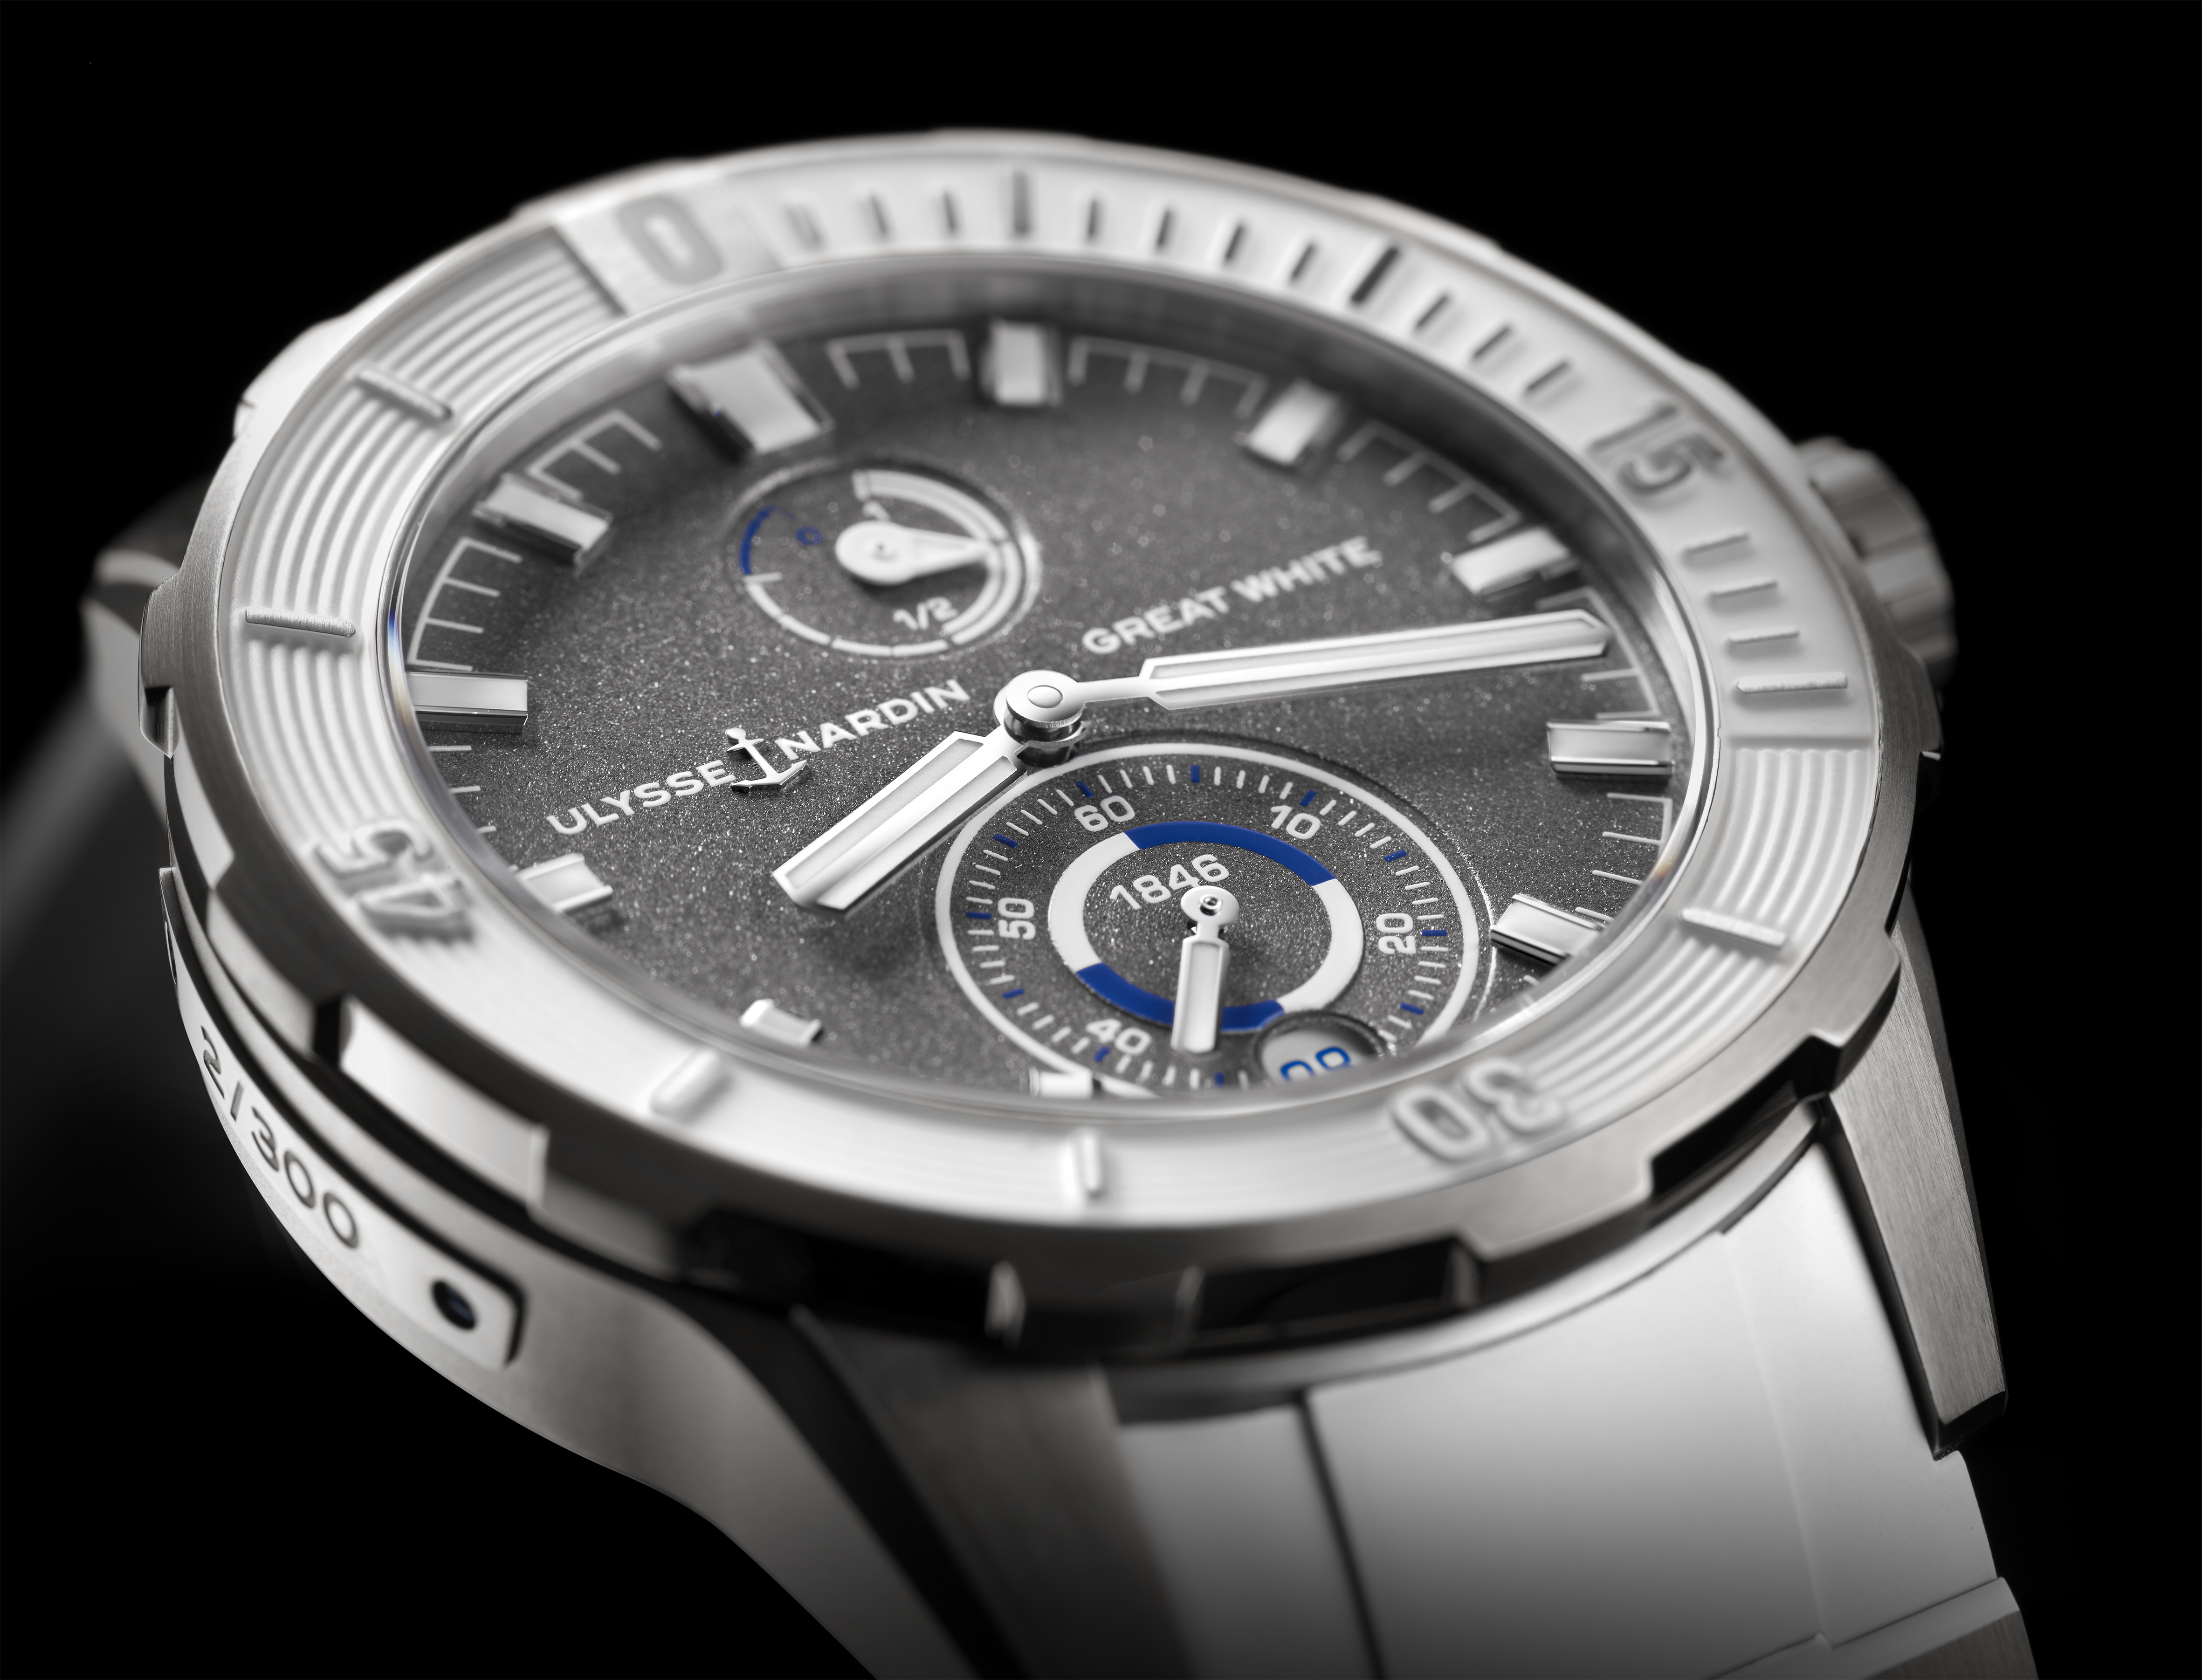 Ulysse Nardin – Diver Great White and Monaco Limited Edition